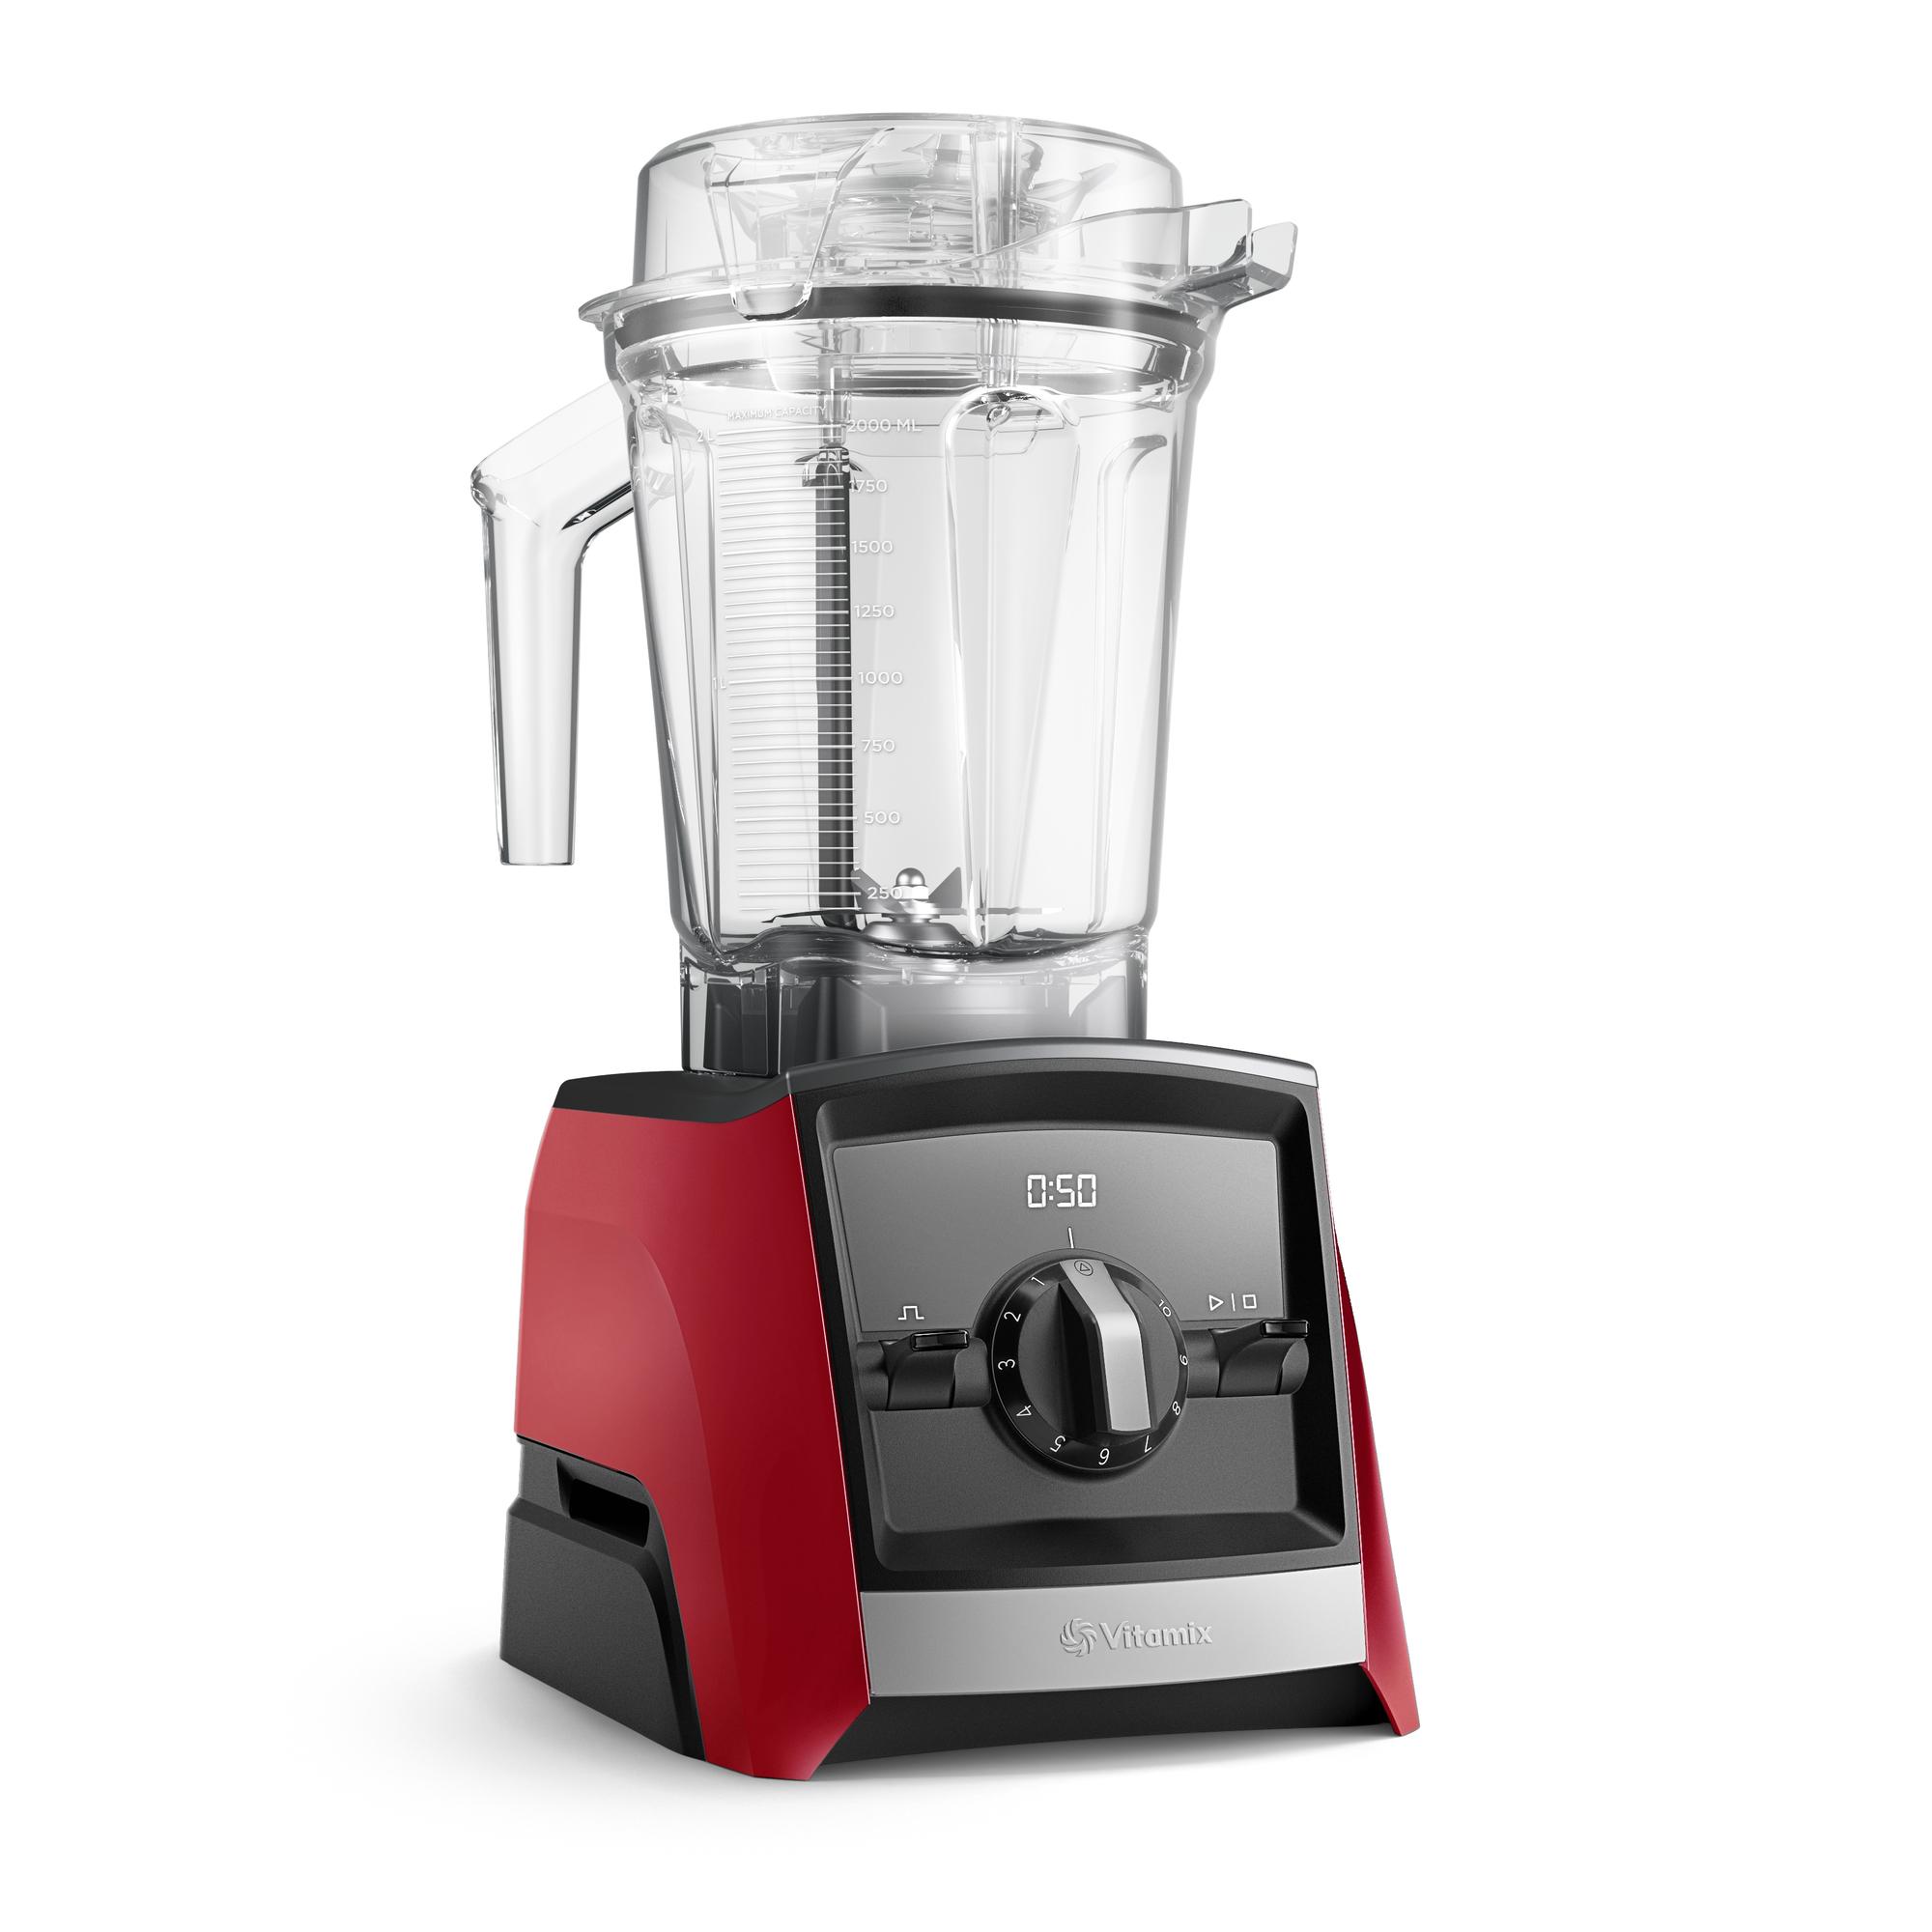 POWER BASE ONLY-WORKS GREAT-ELITE GOURMET COMPACT SLOW JUICER